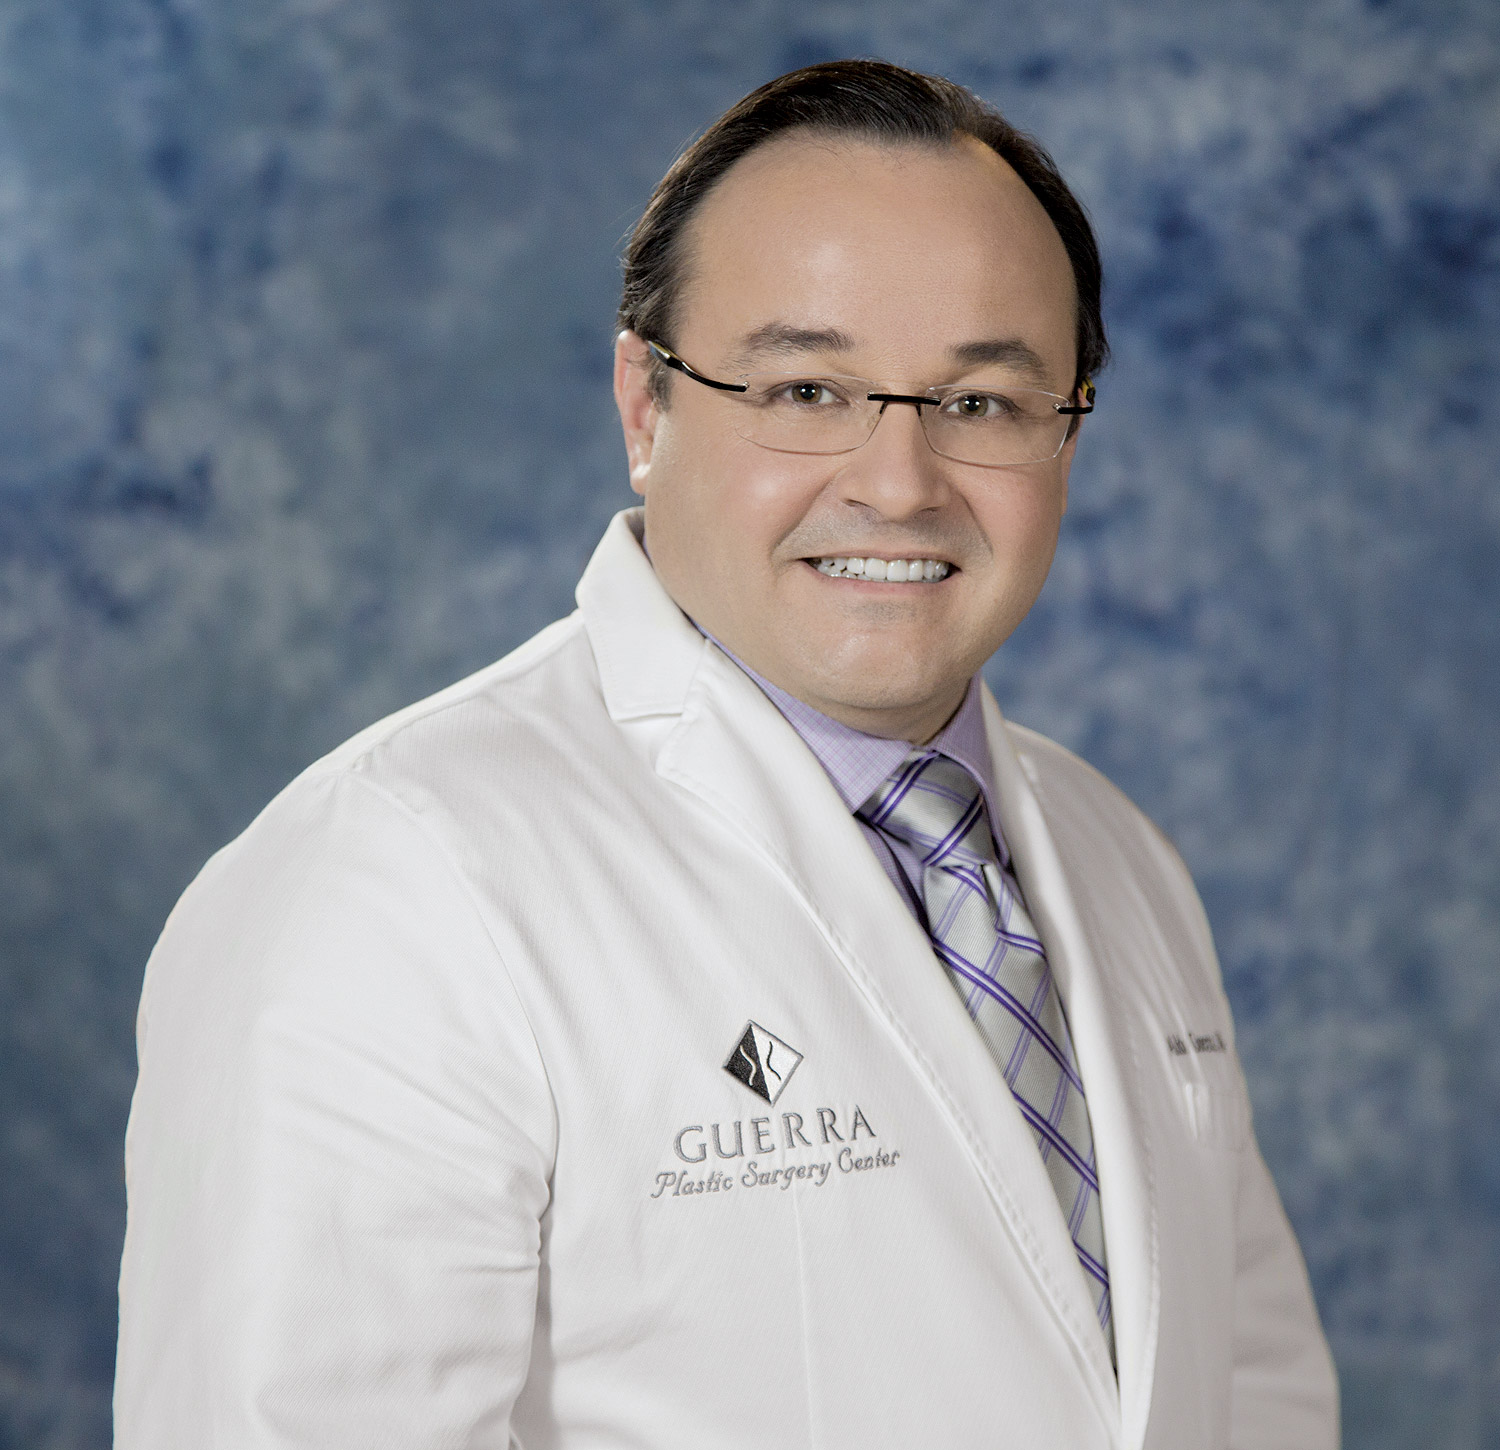 550cc Breast Augmentation with Mentor® MemoryShape® Breast Implants by Dr. Aldo Guerra